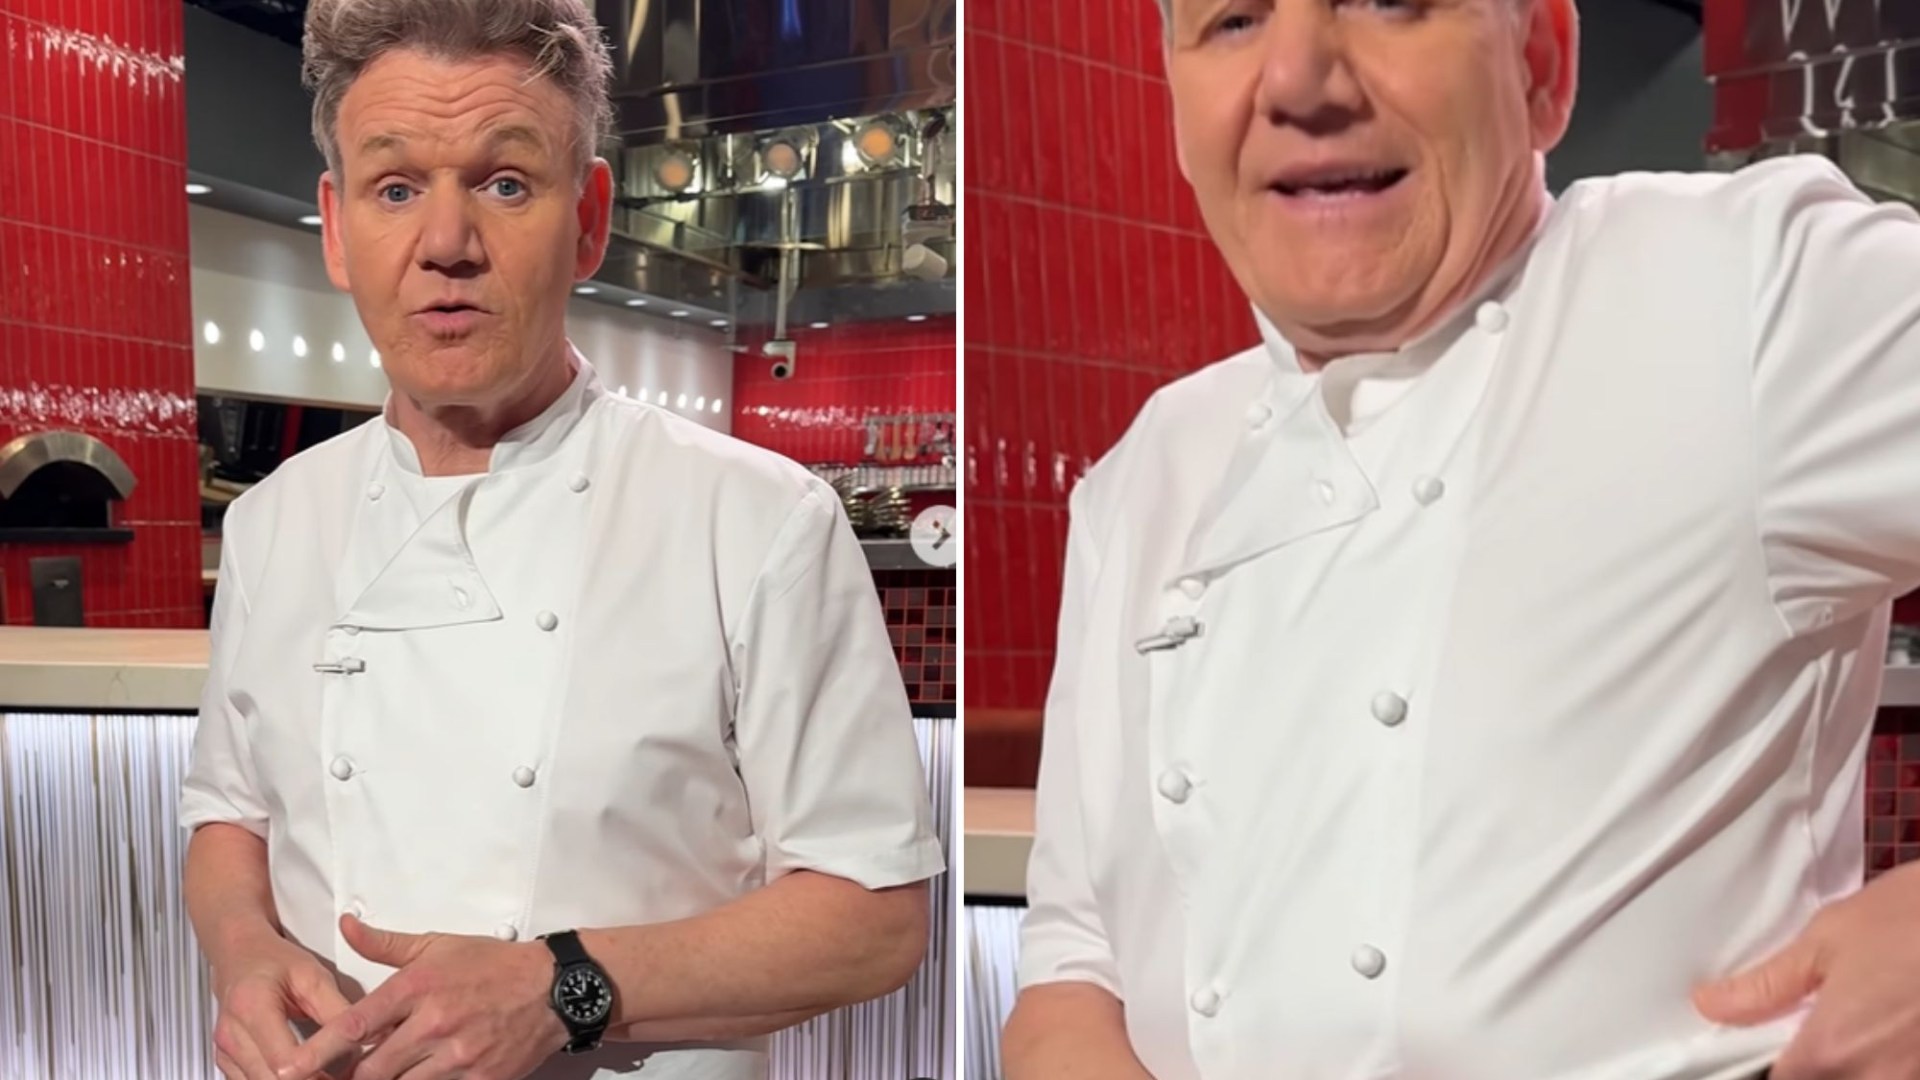 Gordon Ramsay reveals horrific bruised torso after terrifying accident as he credits bike helmet for saving his life [Video]